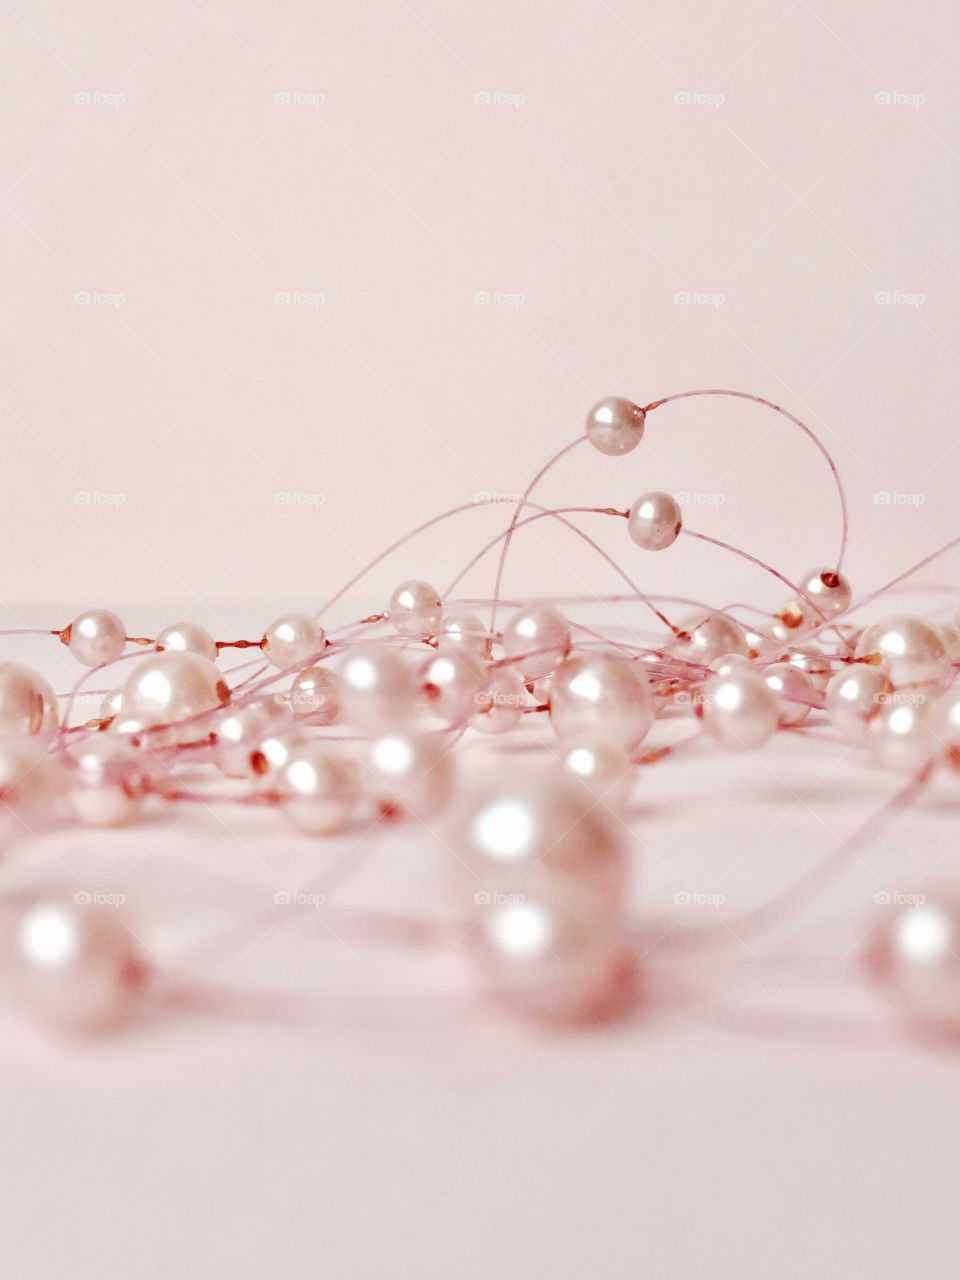 Close-up of pearl necklace on white background